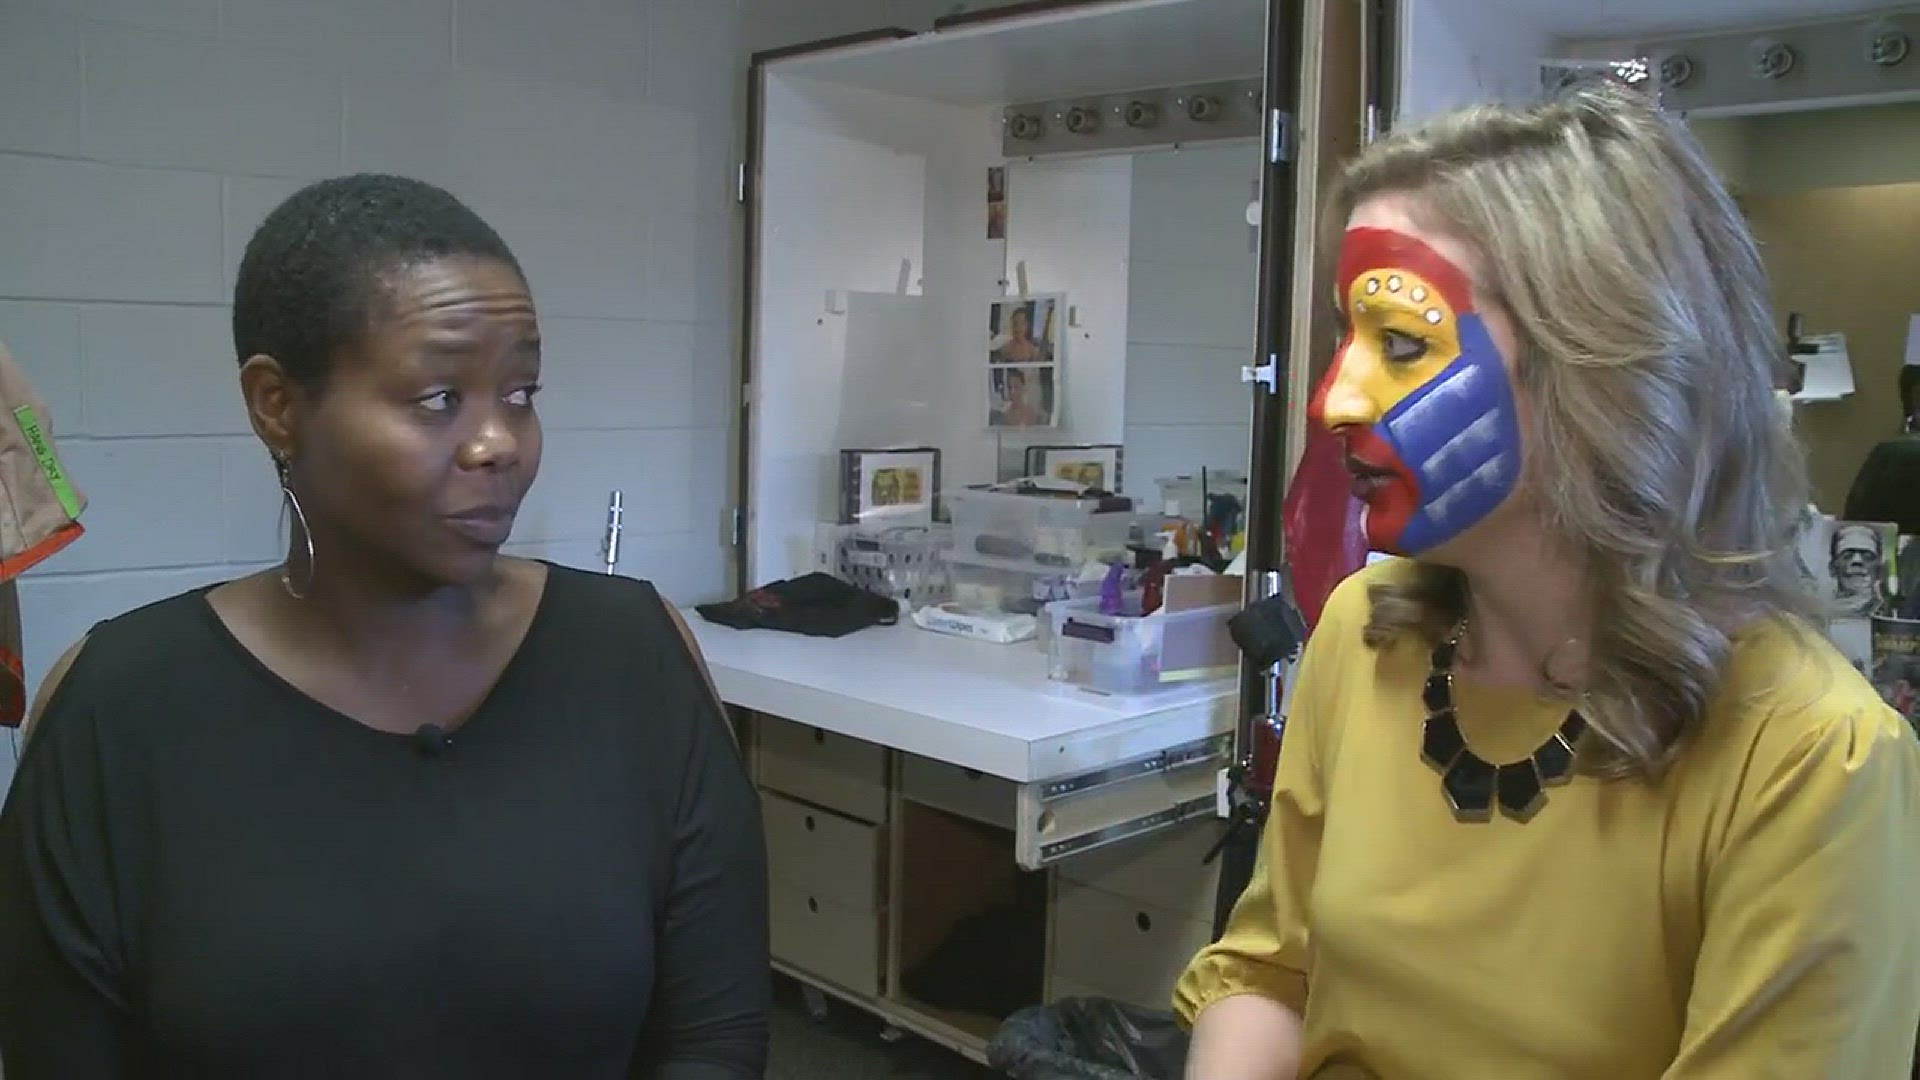 While backstage covering The Lion King, 2 On Your Side's Stephanie Barnes got into the character of Rafiki. Buyi Zama, the actress who plays Rafiki, even taught her how to speak like the character. Well, Zama tried.